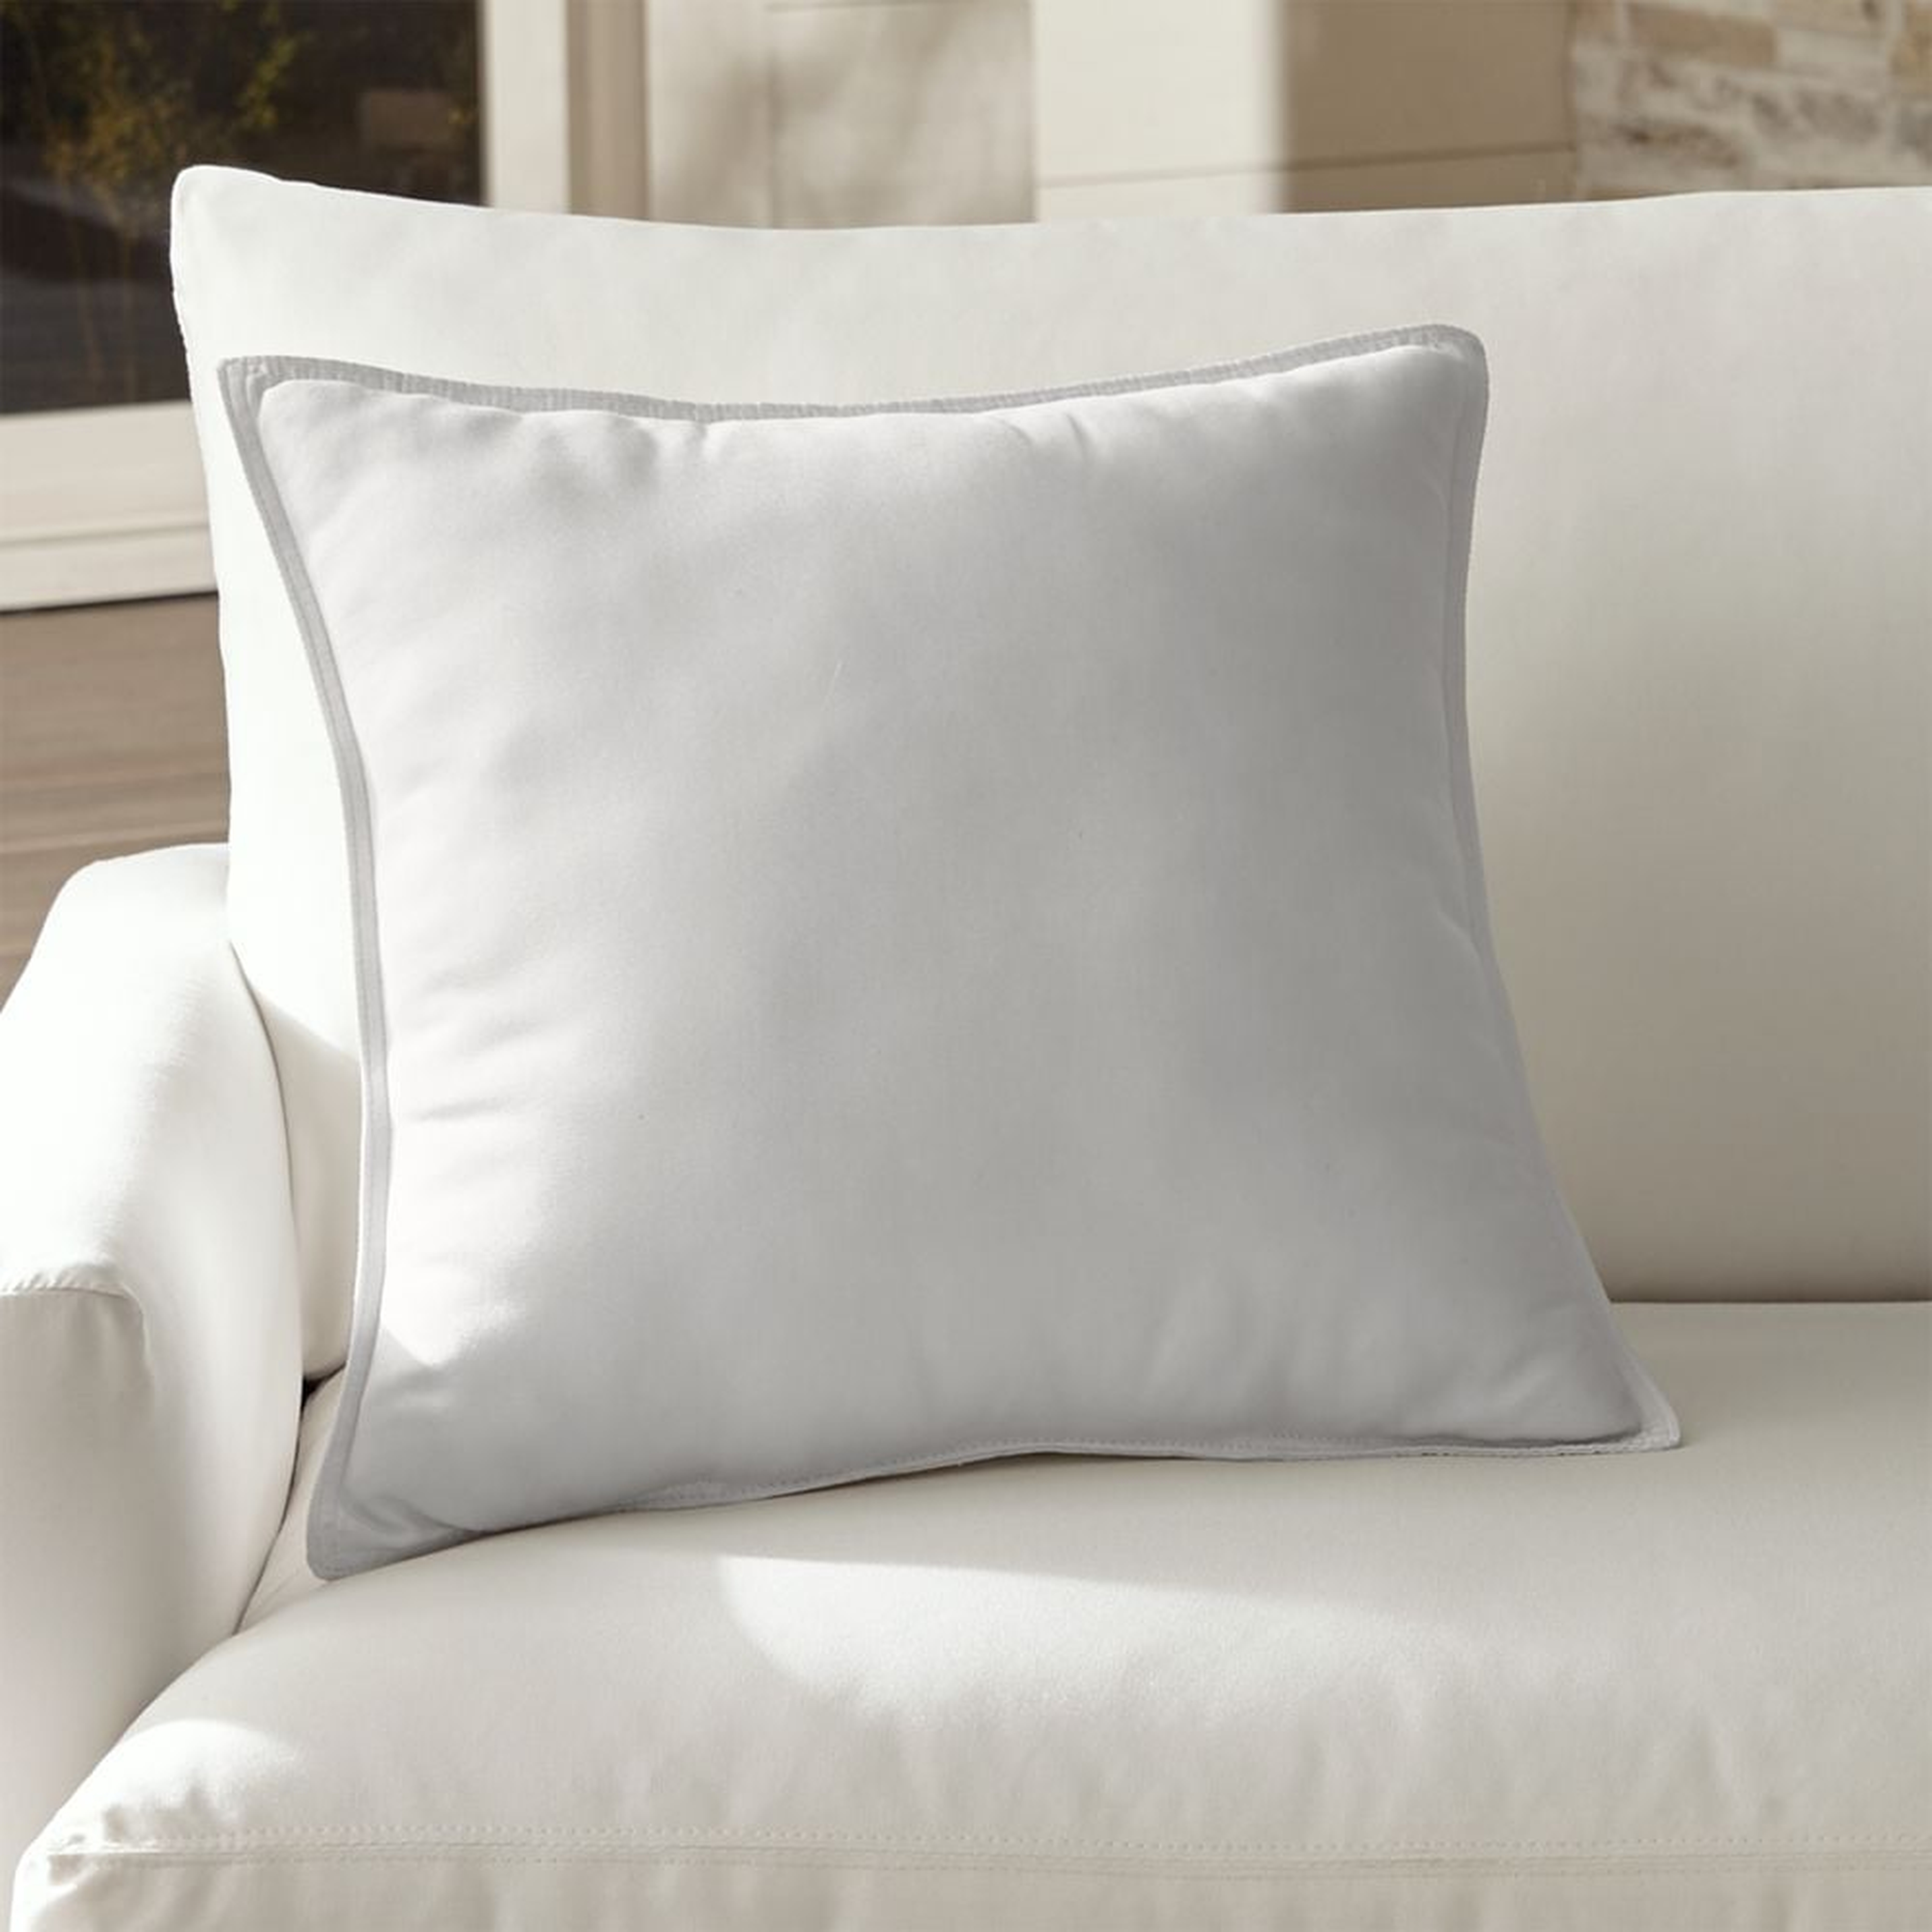 Sunbrella ® White Sand 20"x20" Outdoor Pillow - Crate and Barrel